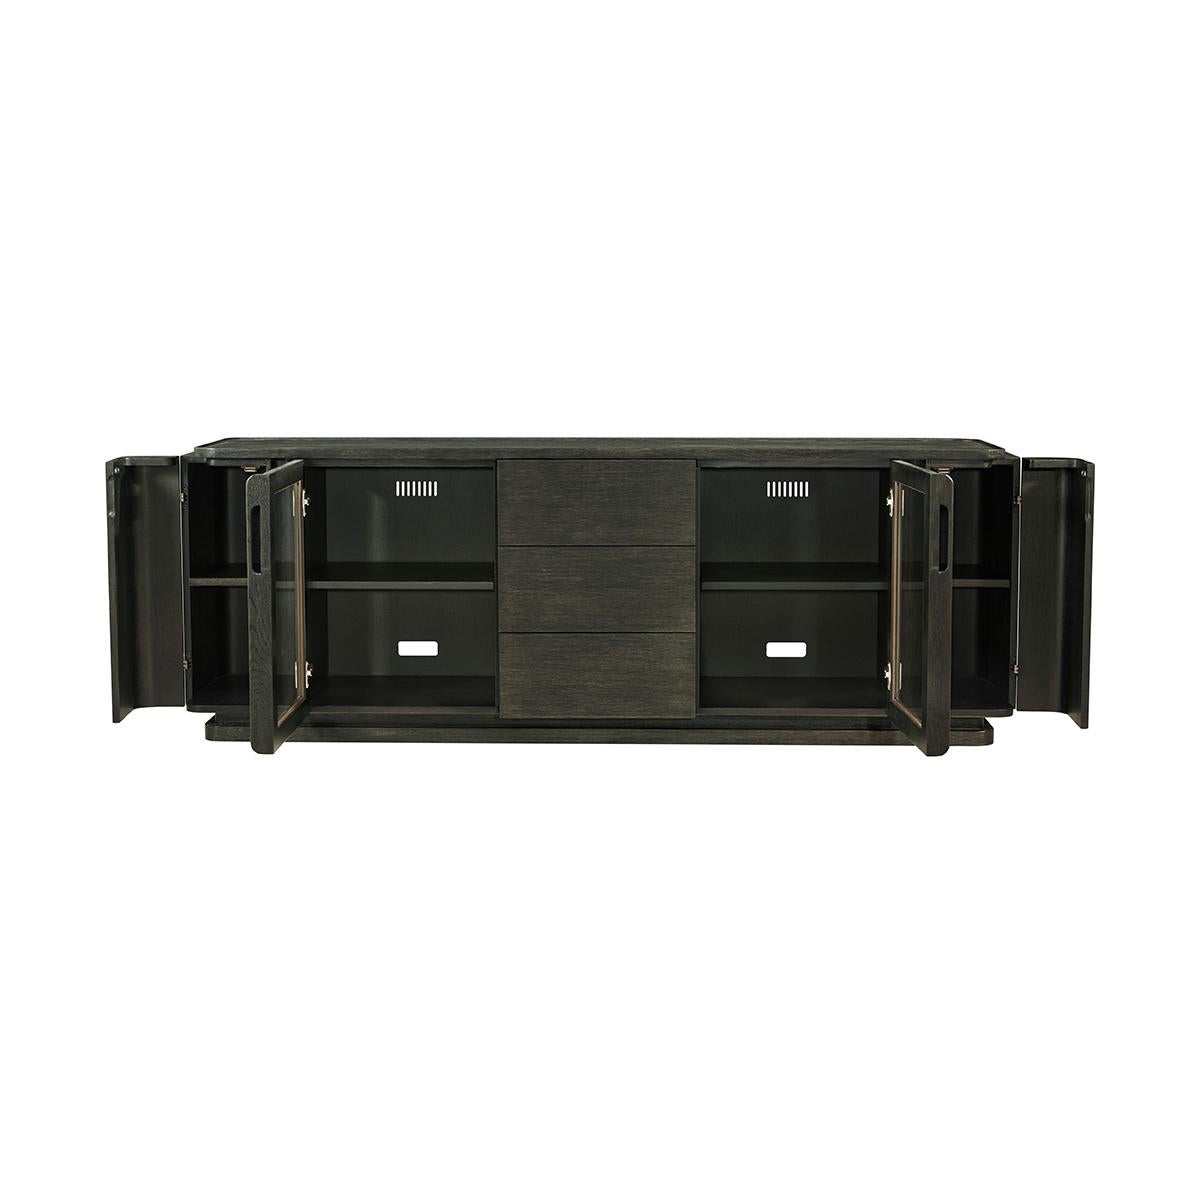 With an amazing amount of storage for all your media. Two glass front cabinets with adjustable shelving, cord cutouts and vents at the back.
Hidden on the ends are curved doors that conceal two small shelves to store away small items, and three,